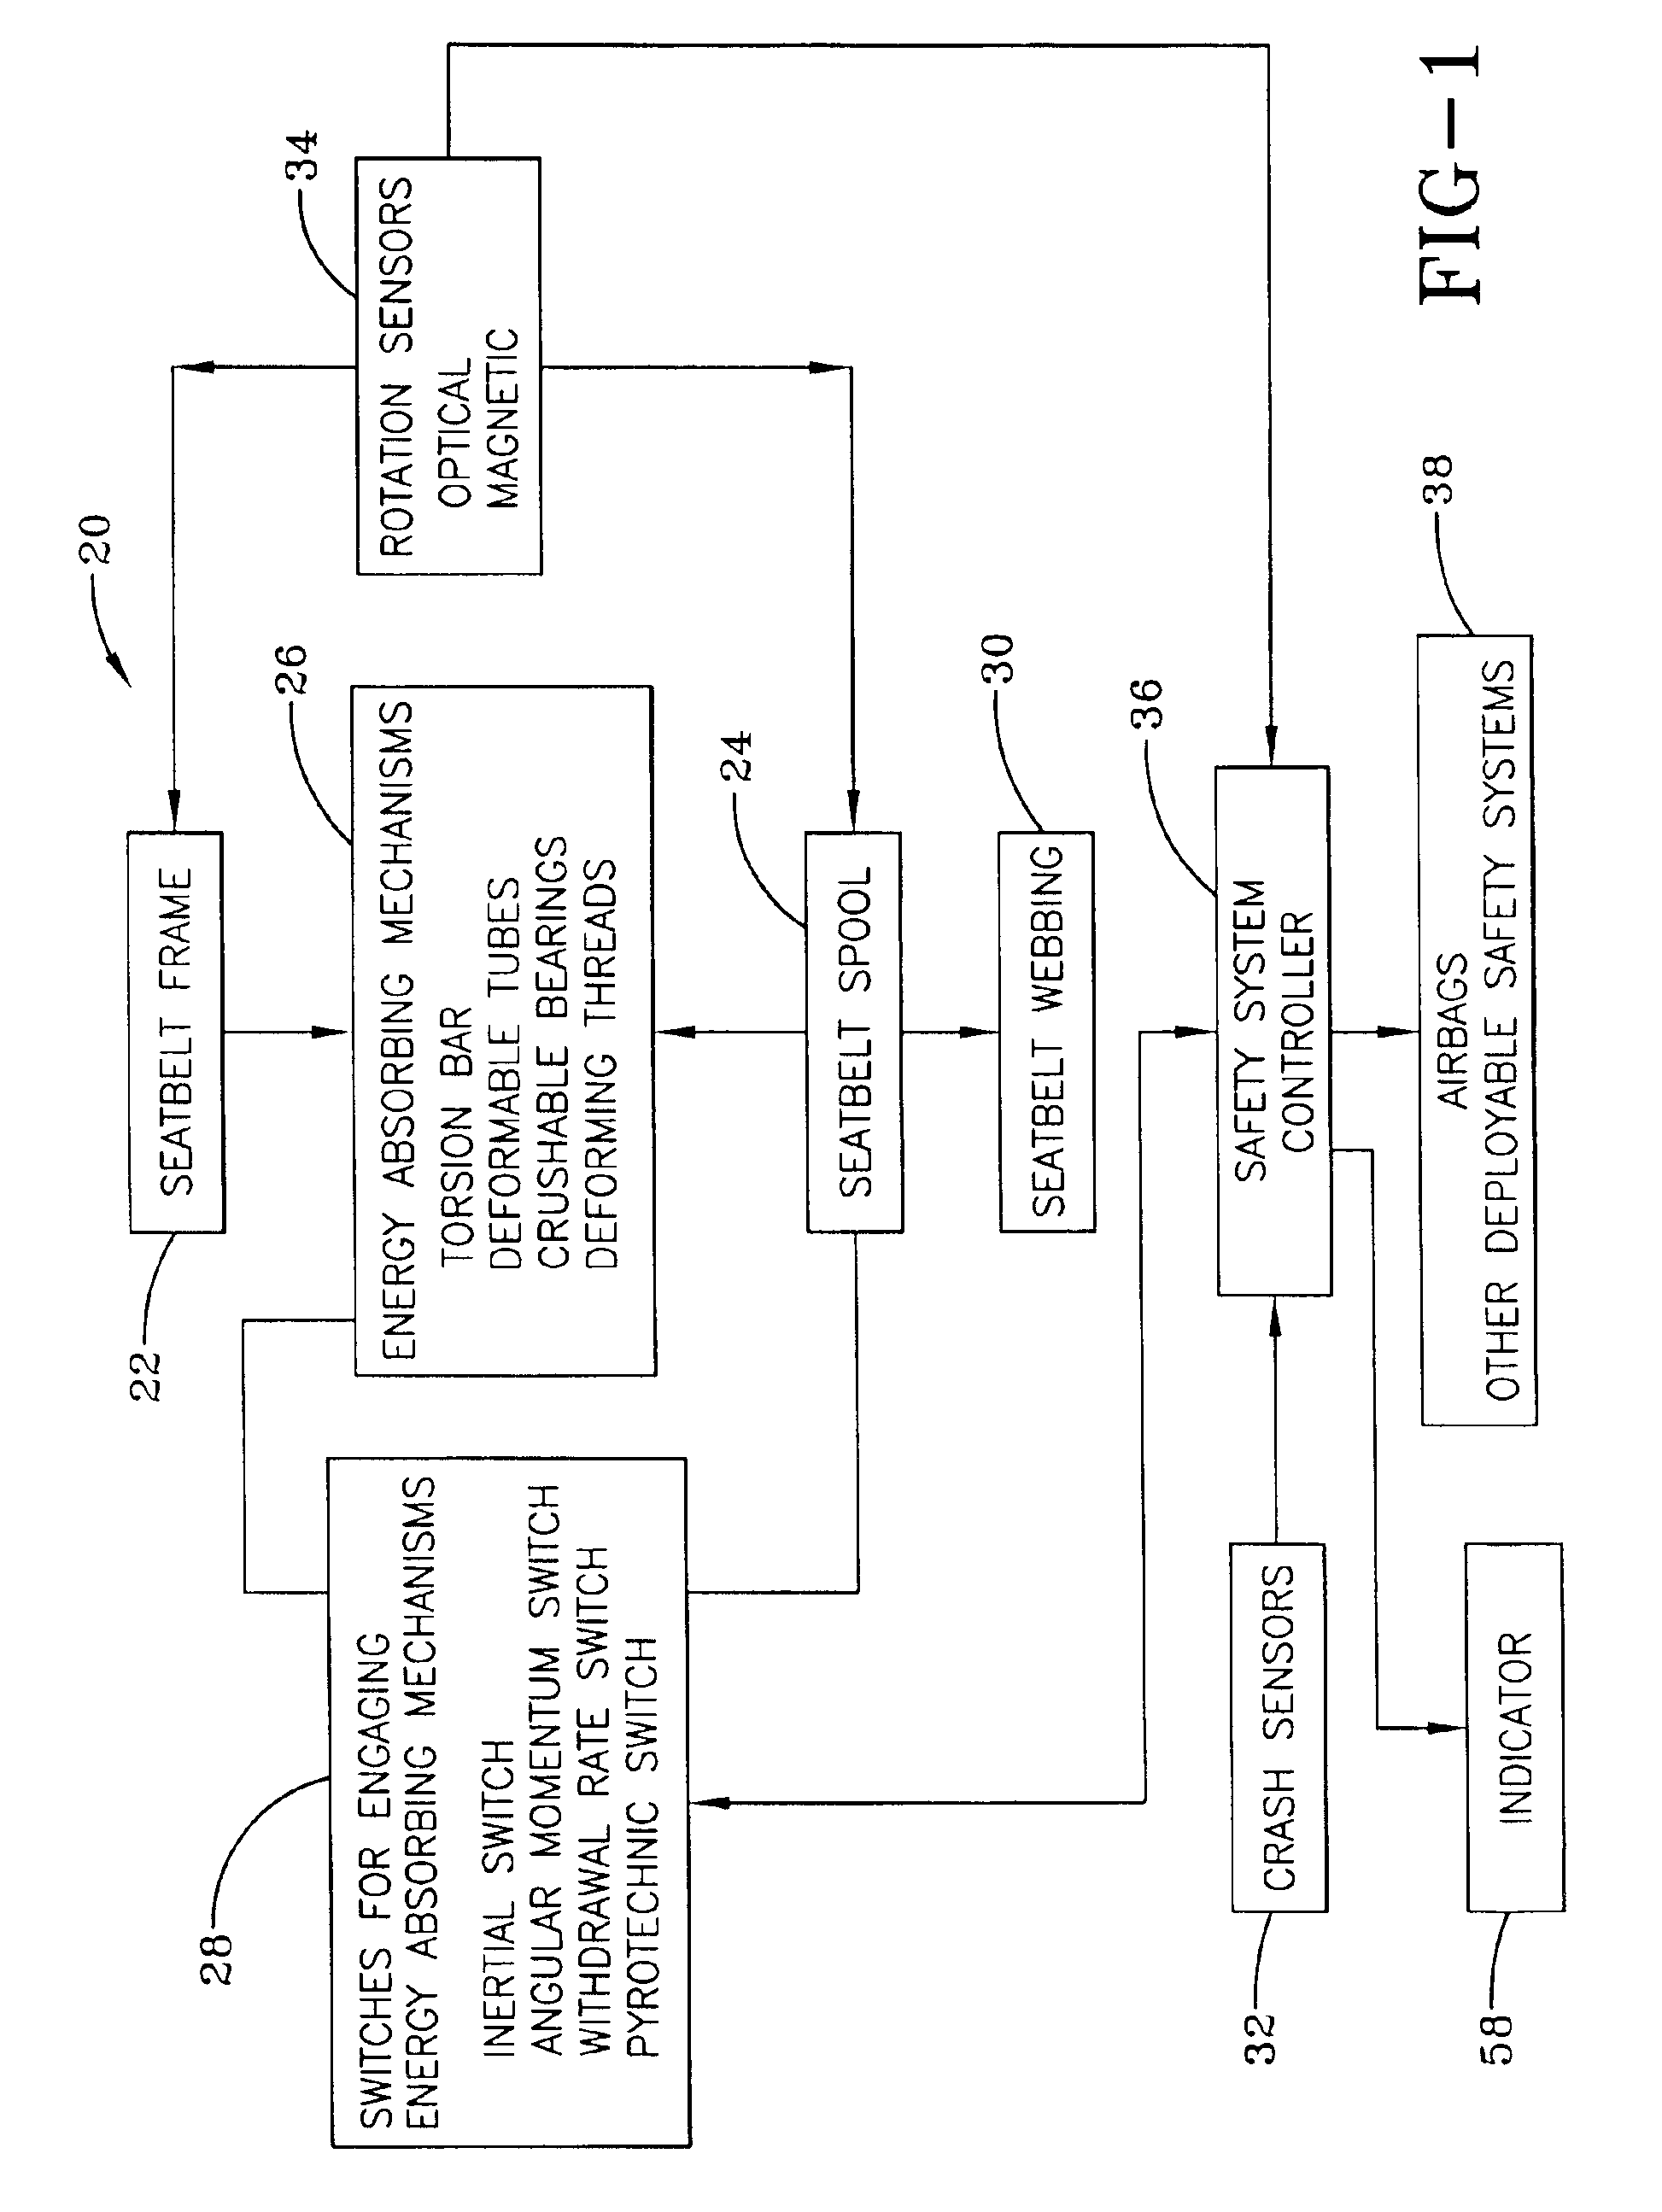 Seat belt sensing for vehicle occupant load and misuse